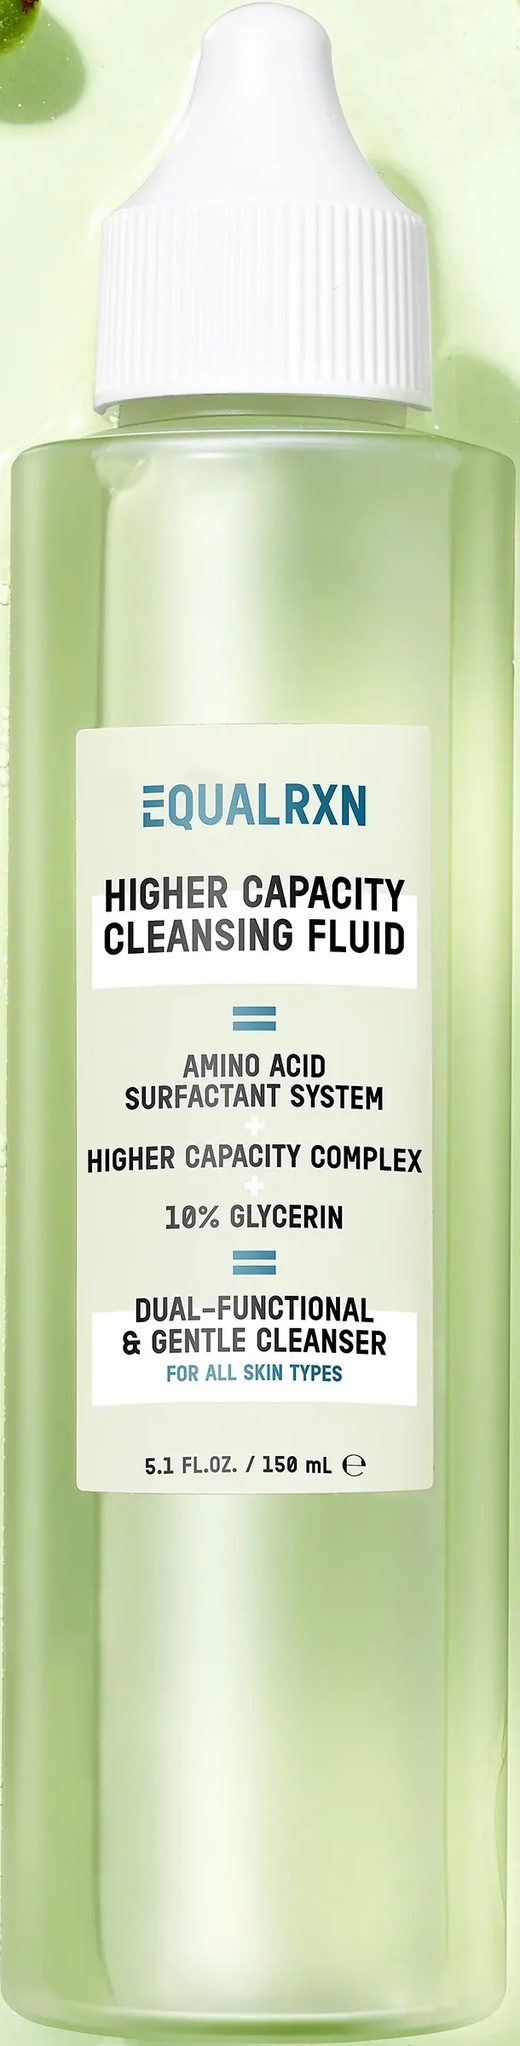 Equal RXN Higher Capacity Cleansing Fluid